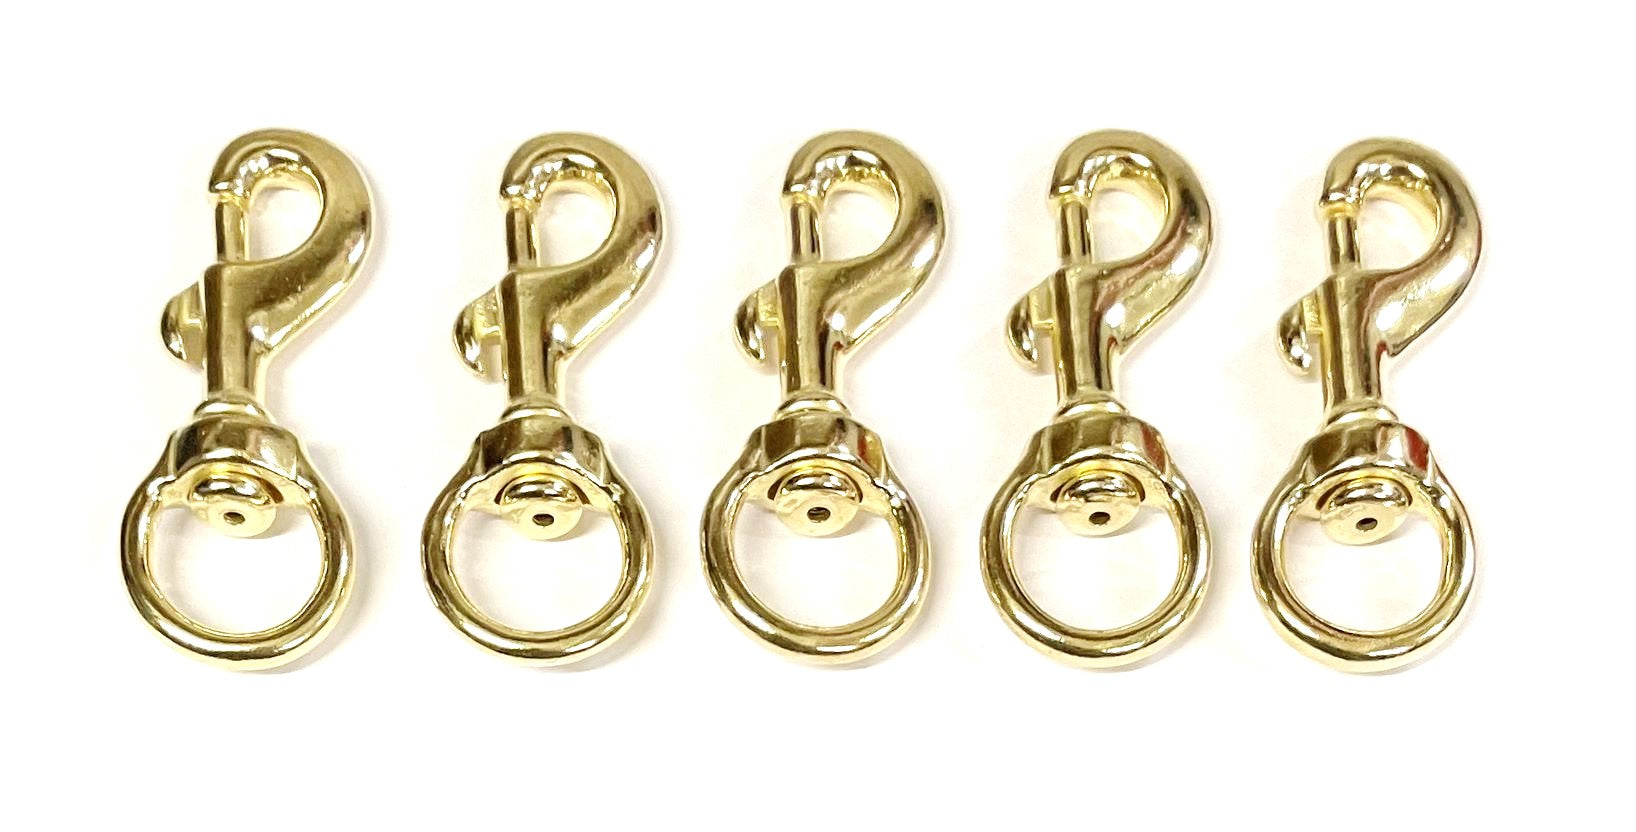 20mm Solid Brass Swivel Trigger Clip Hook Round Eye Heavy Duty For Dog –  Church Products UK®